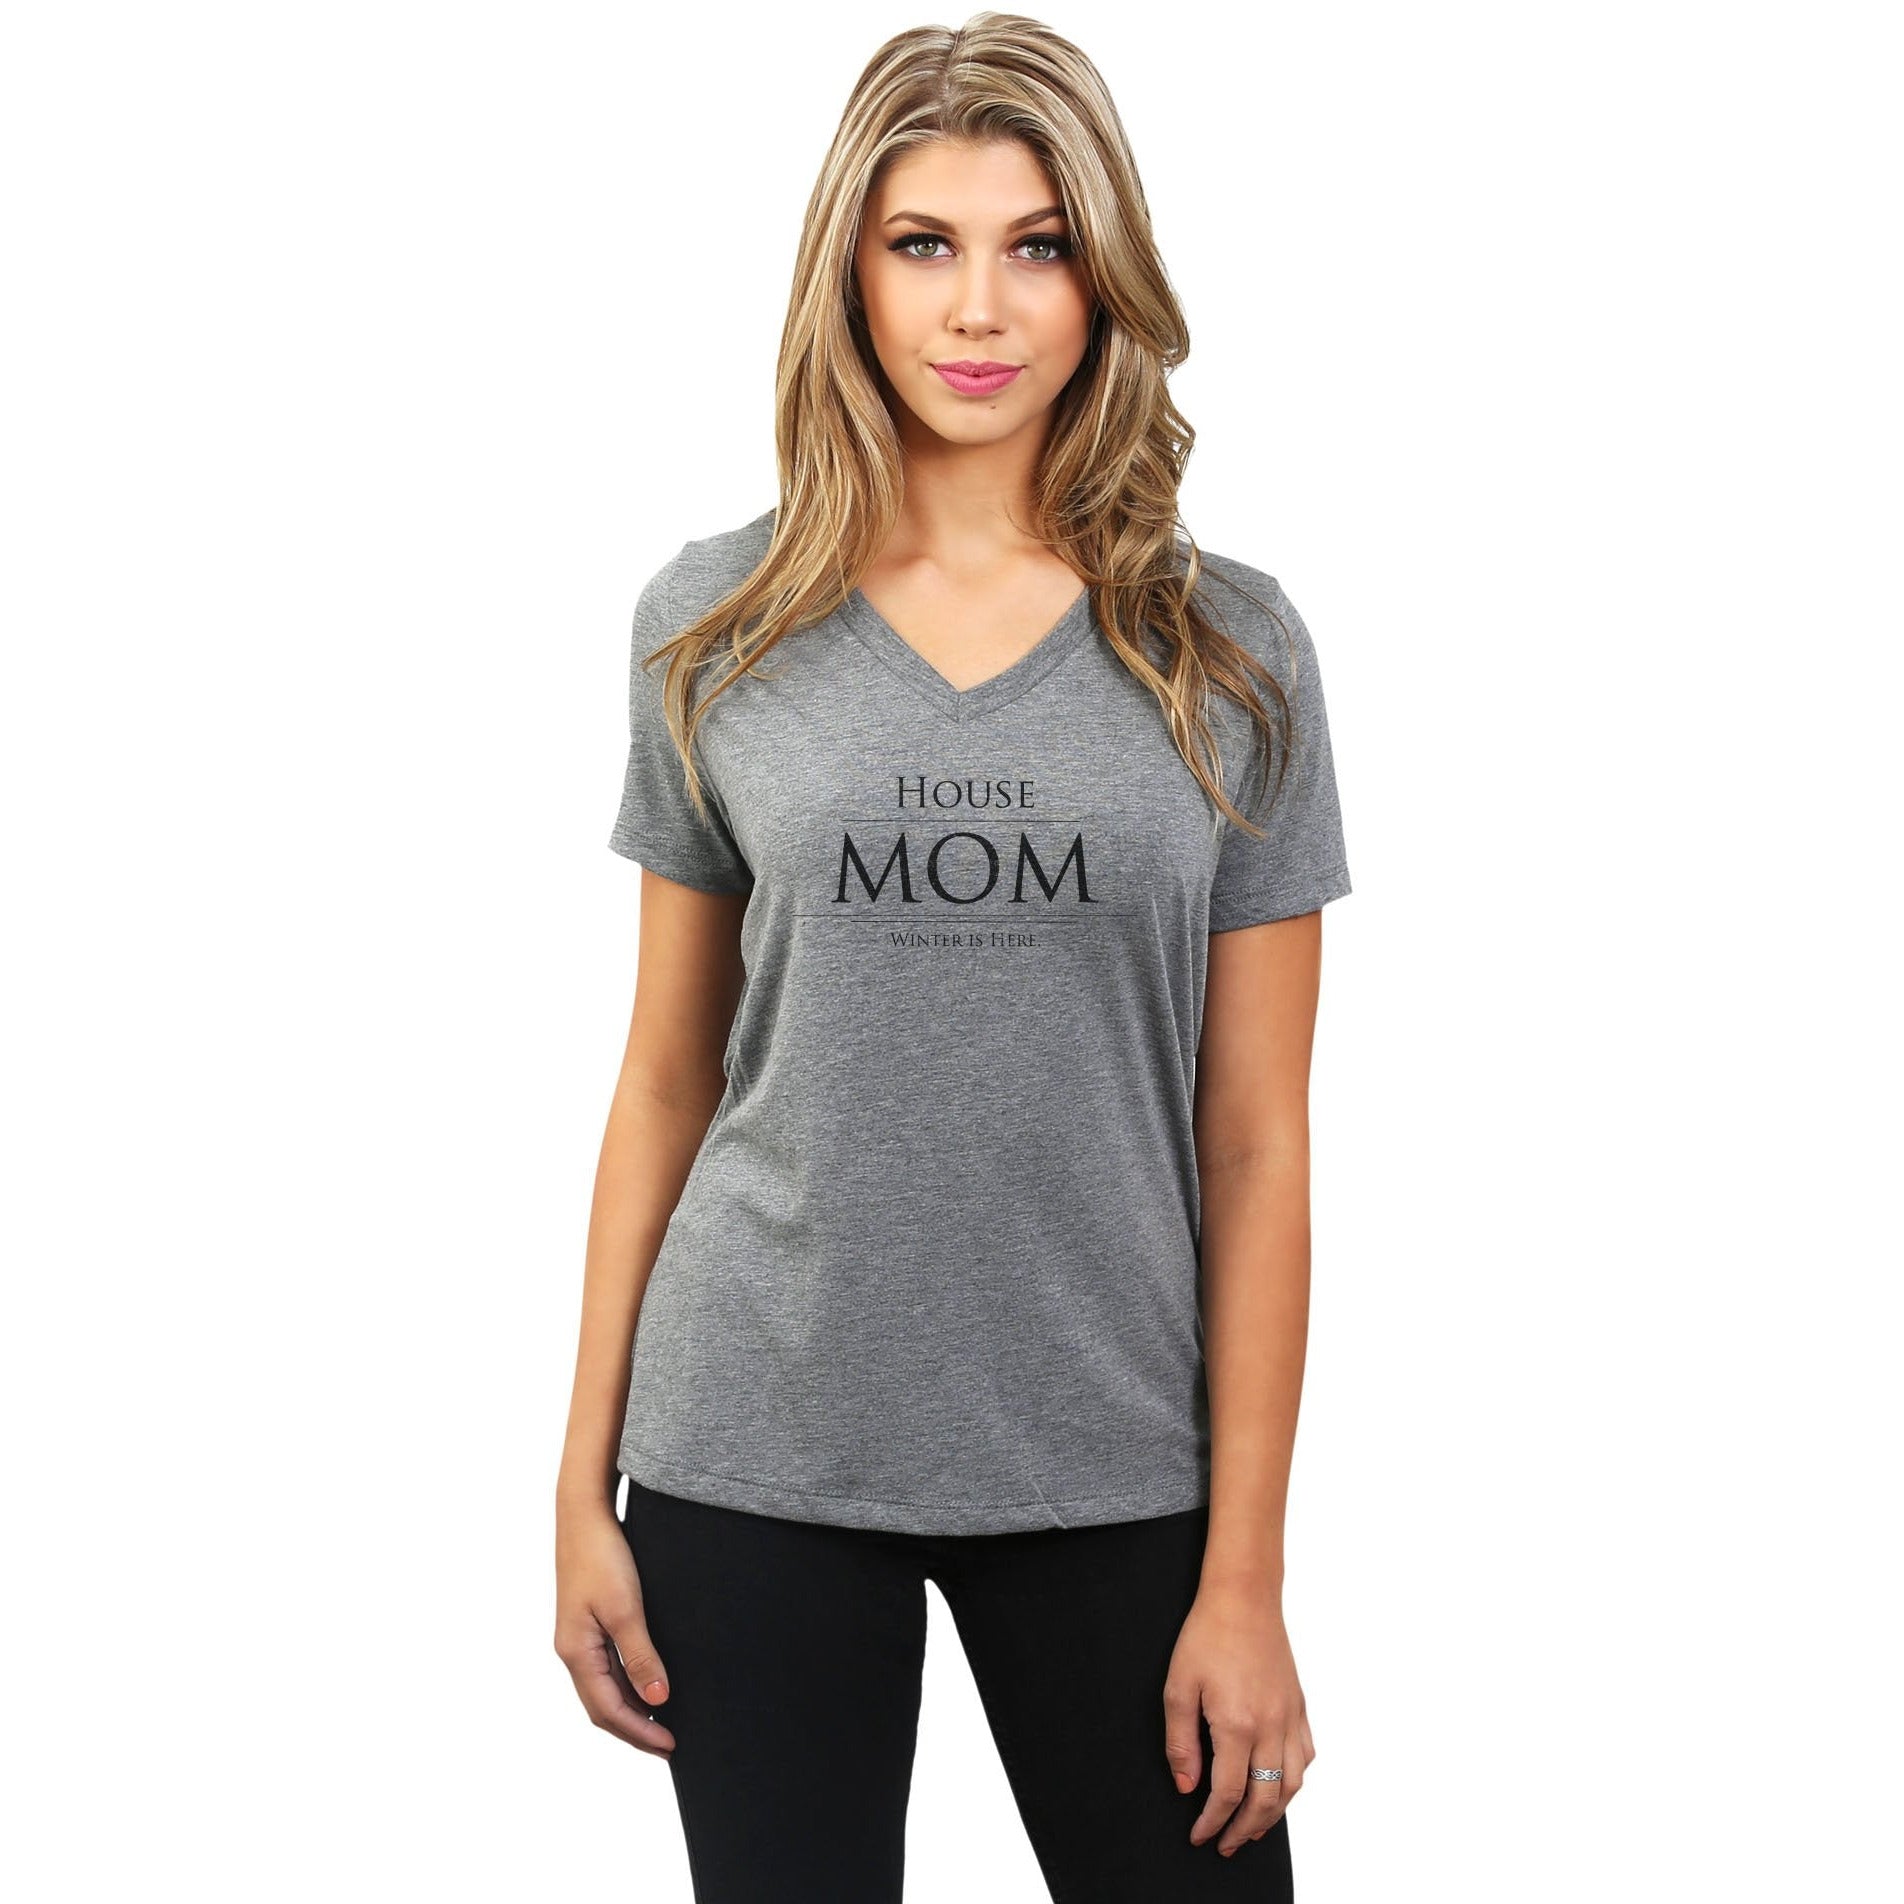 House Mom Winter Is Here Women's Relaxed V-Neck T-Shirt Tee Heather Grey Model